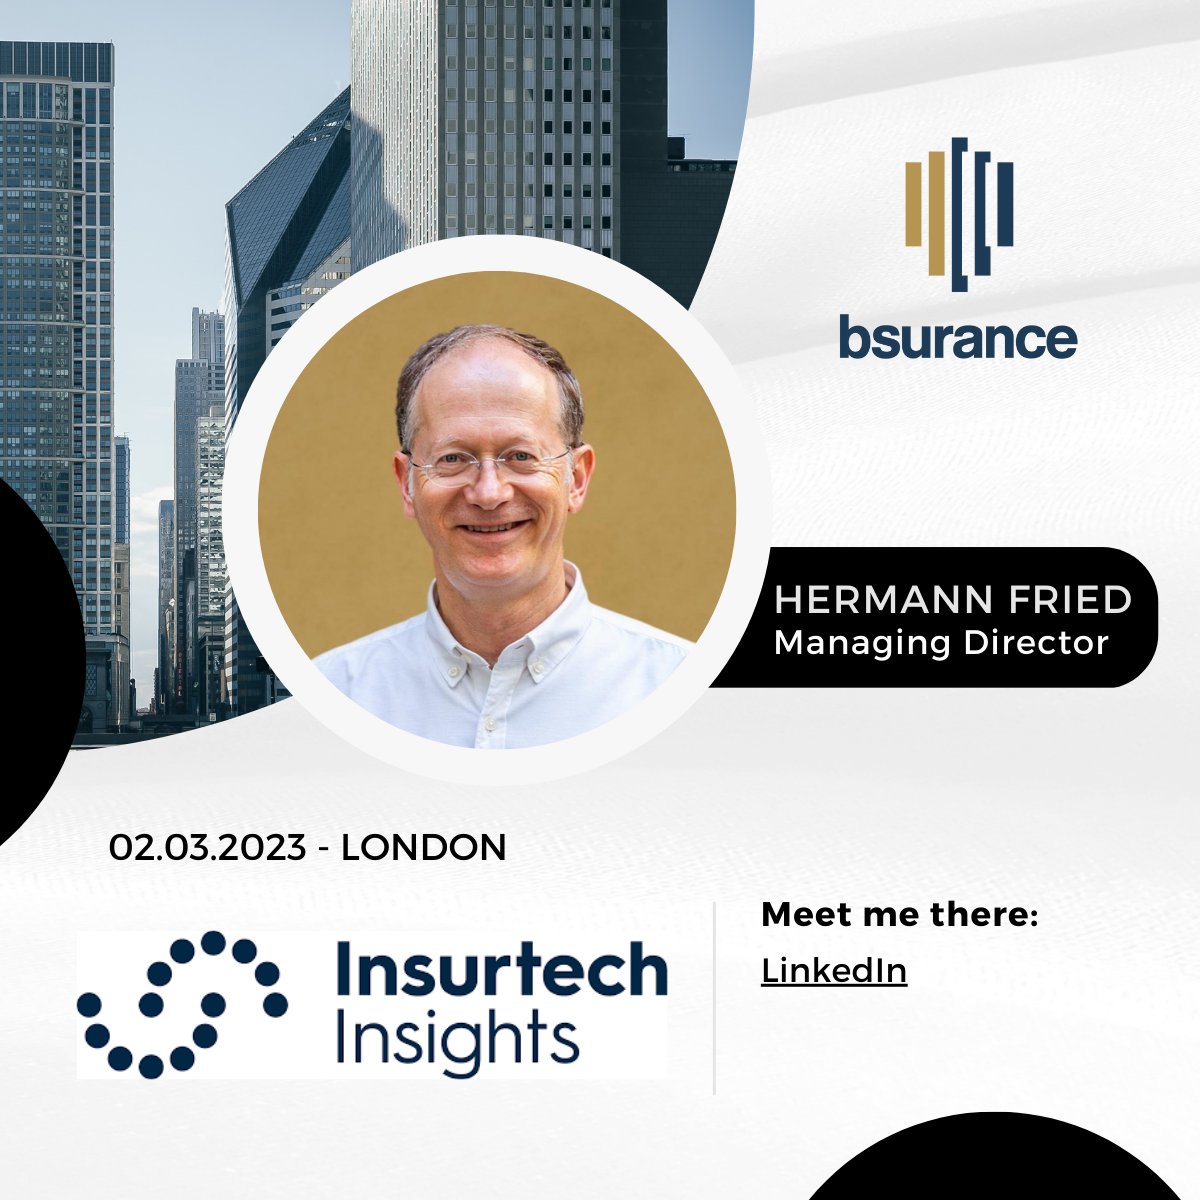 Going to @ITI_Insurtech in London this week? 🇬🇧 🎯 Don't miss the opportunity to meet up with @bsurance's Managing Director & CIO Hermann Fried to discuss the opportunities of embedded insurance!